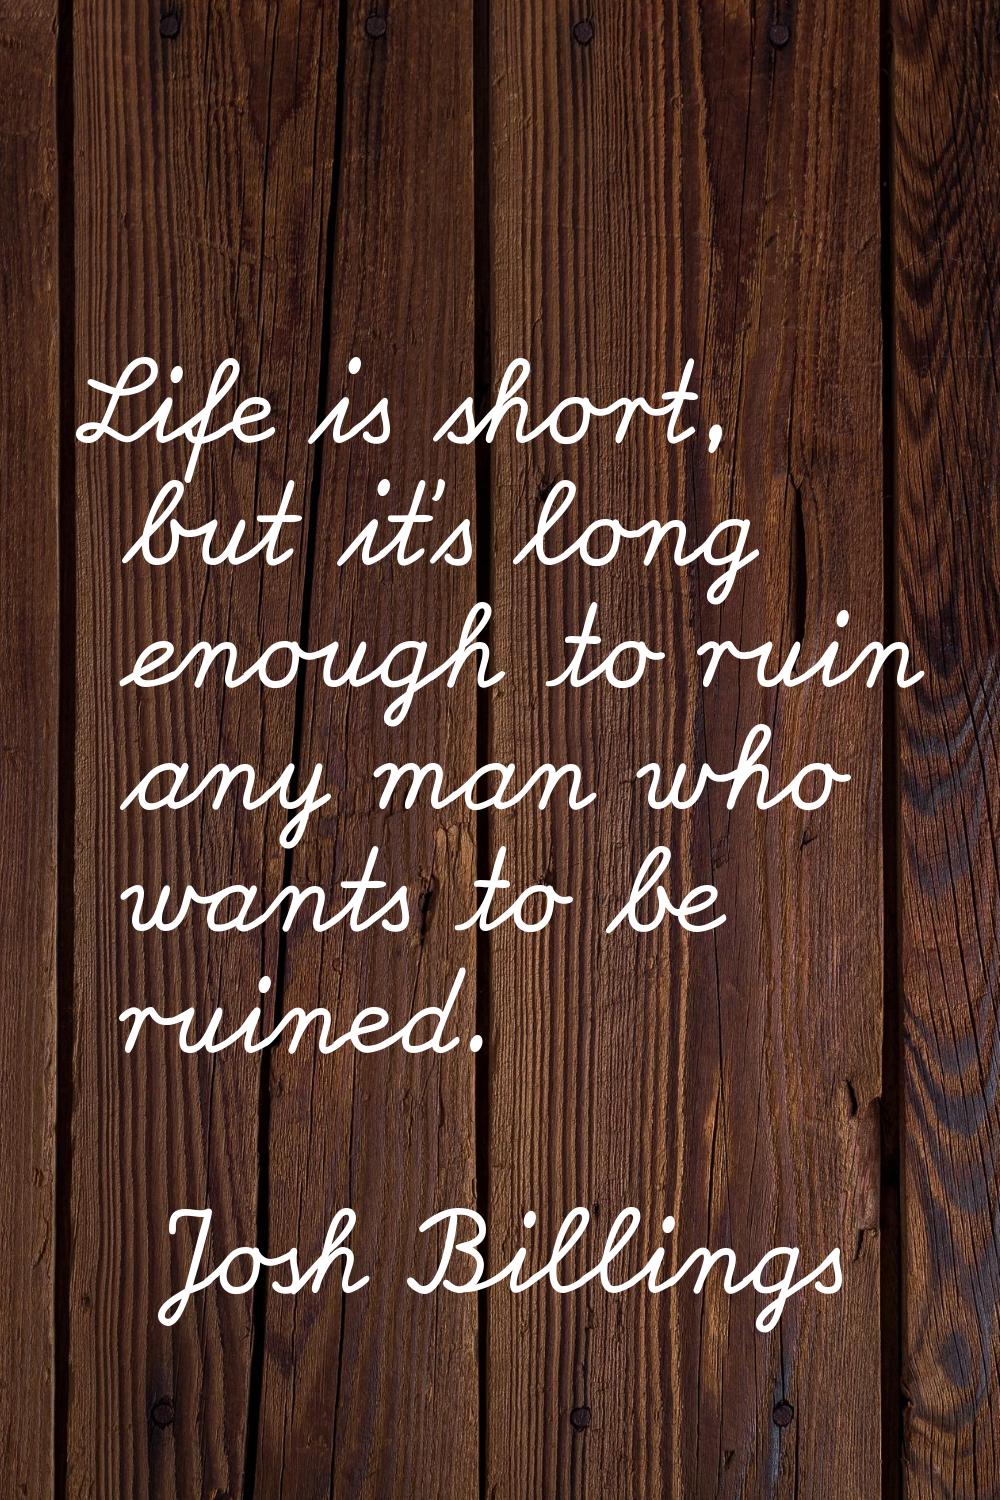 Life is short, but it's long enough to ruin any man who wants to be ruined.